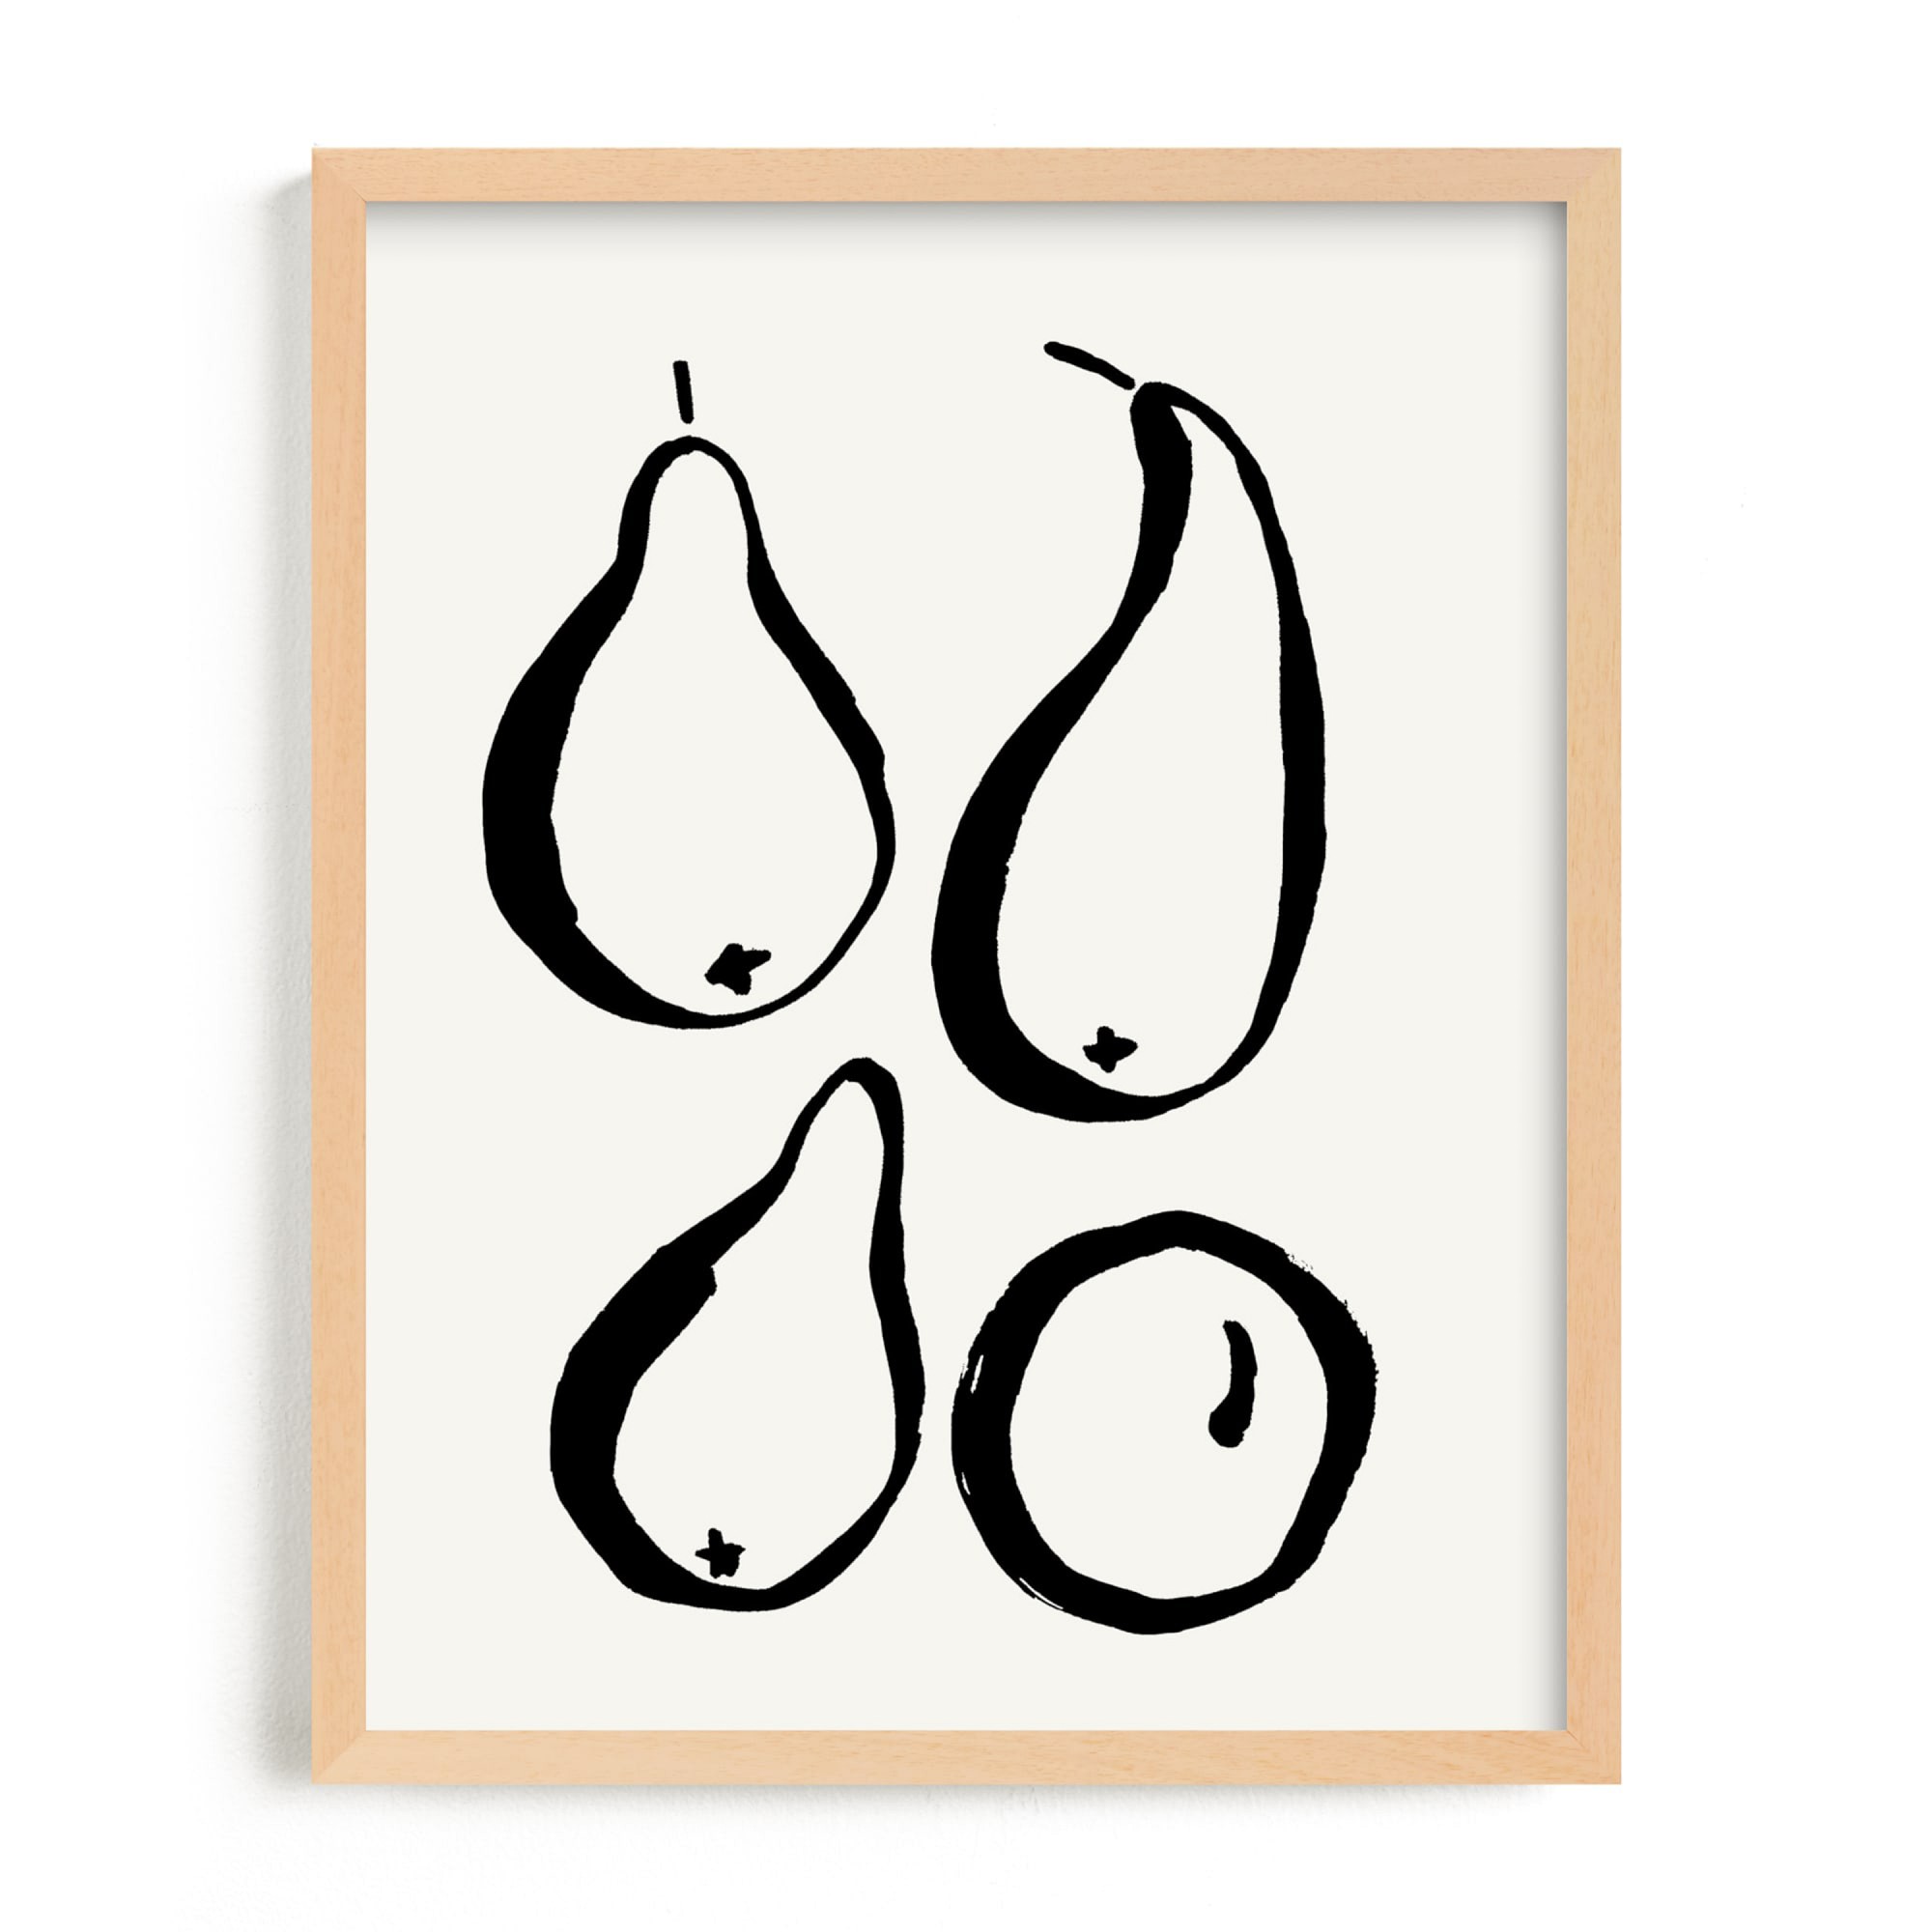 Still-life with Four Pears Limited Edition Kitchen Art by Minted